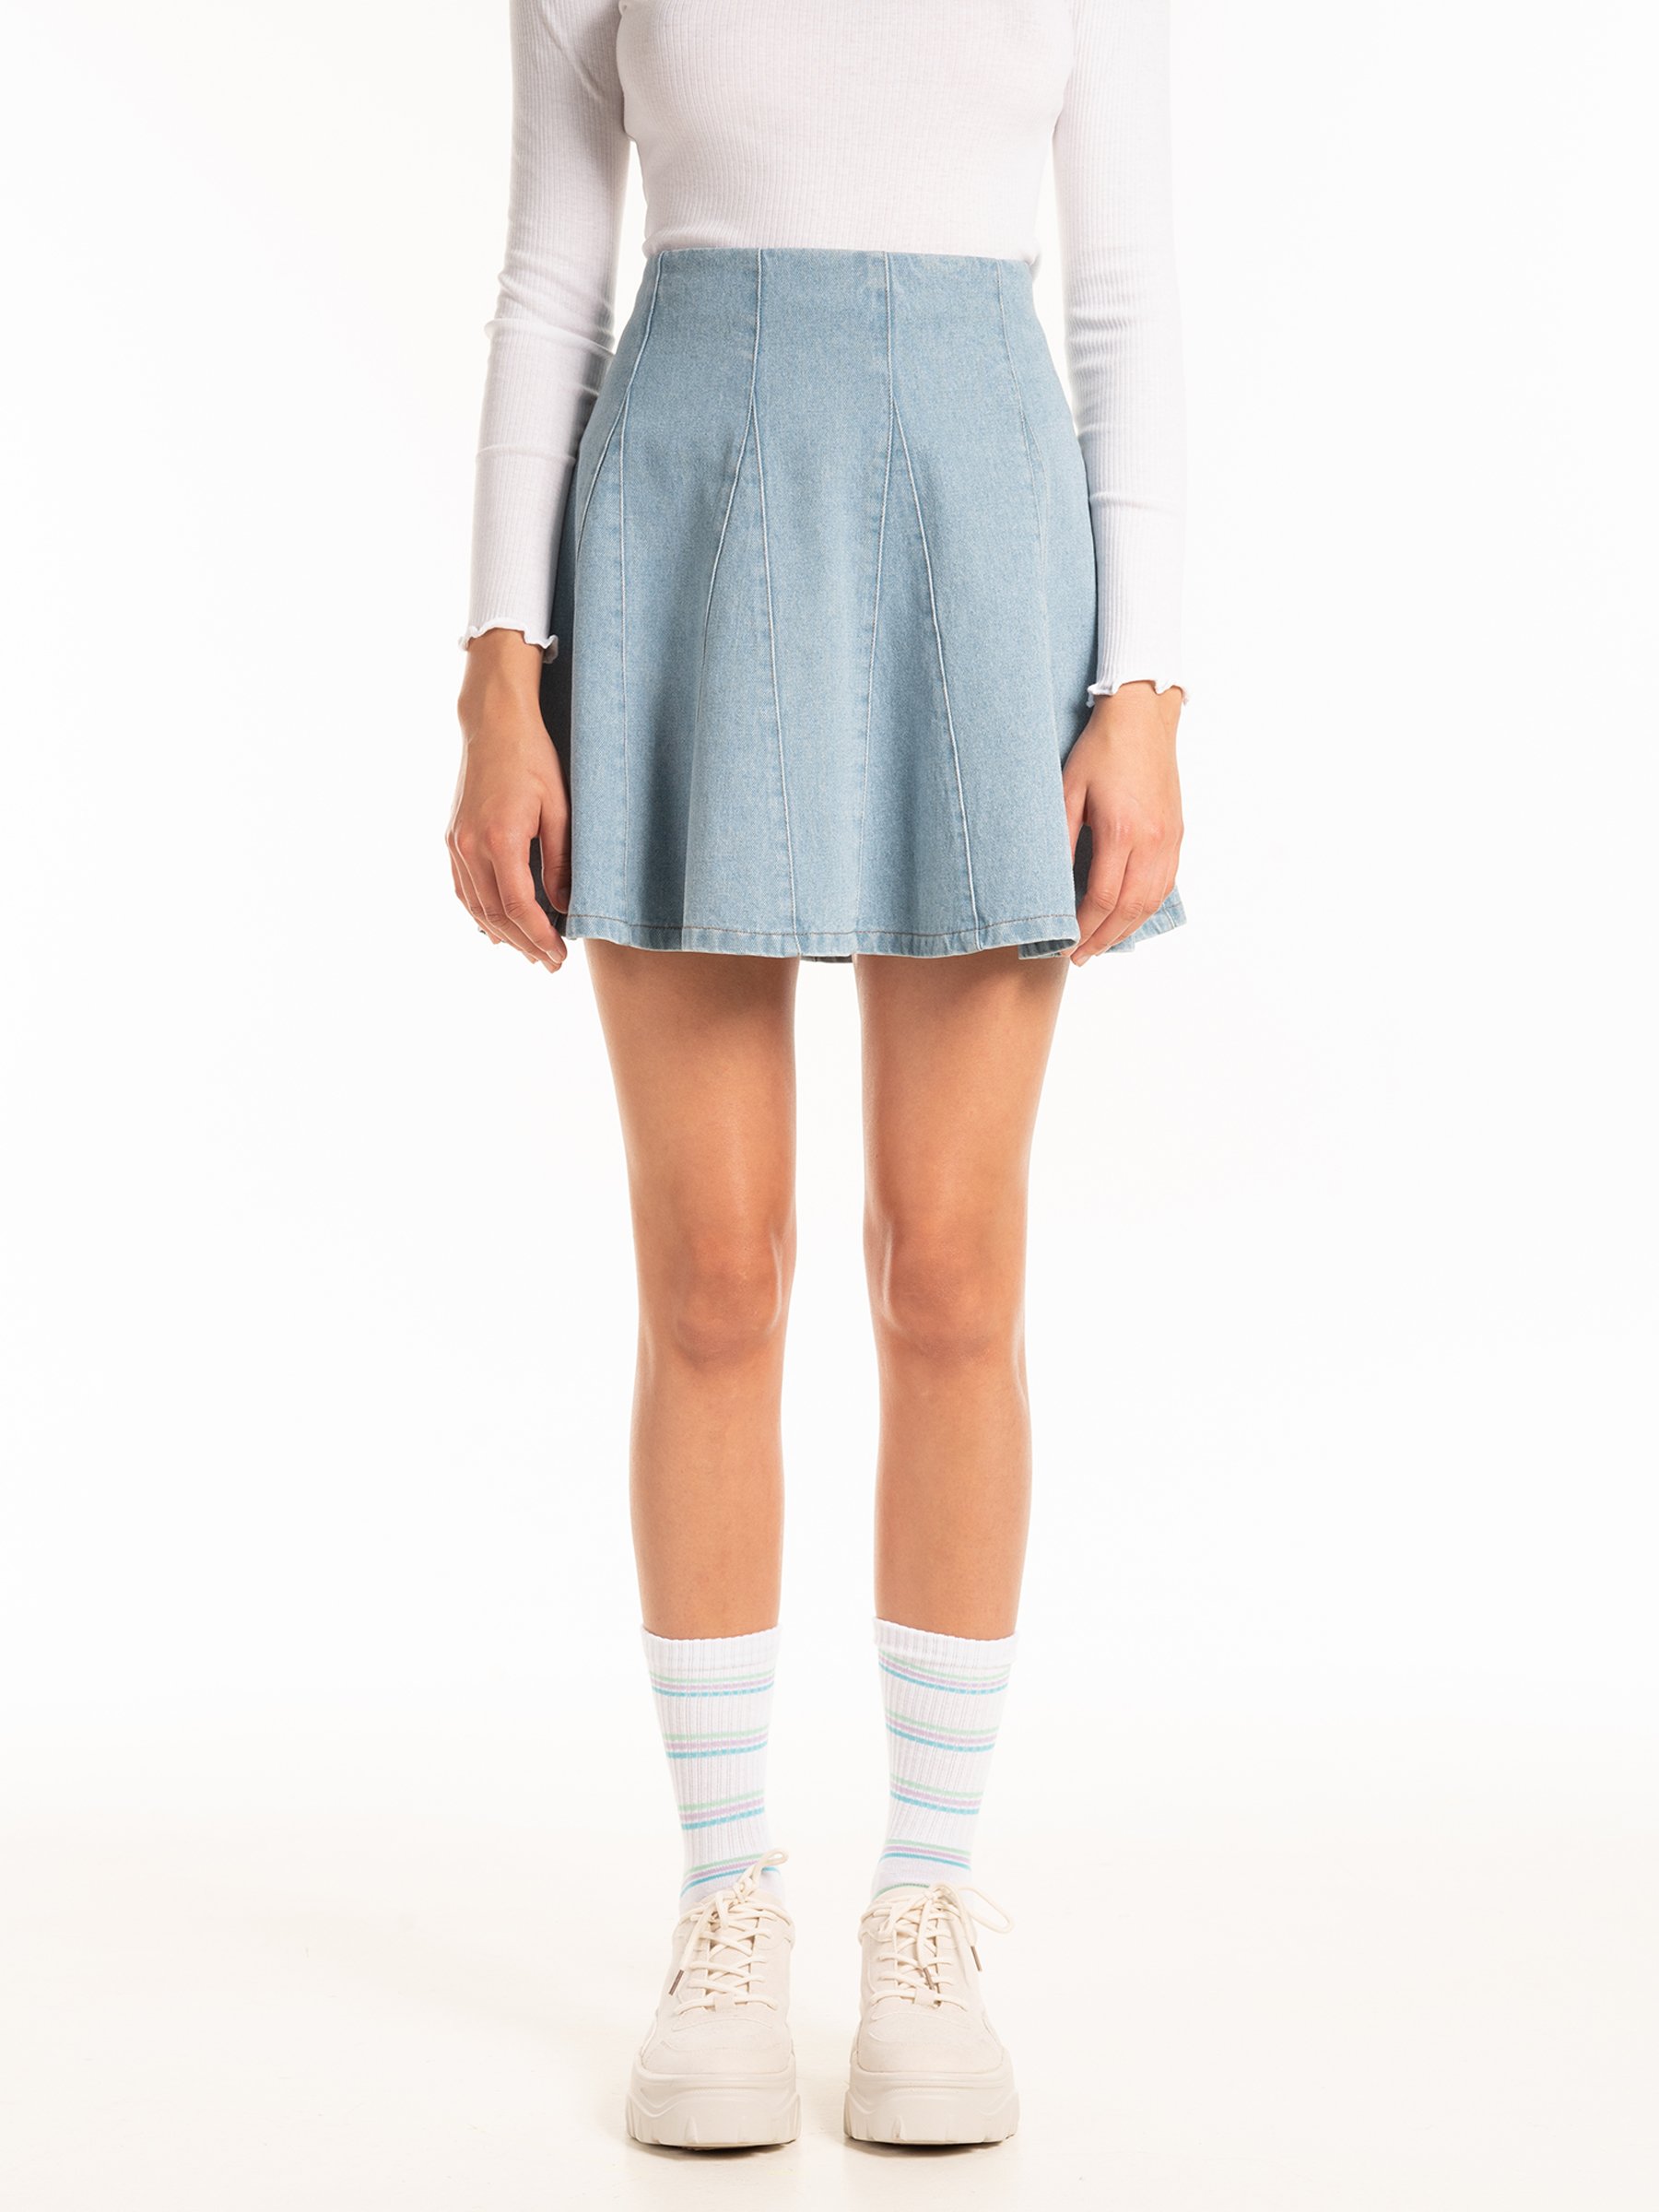 Sweetest Thing Denim Skater Skirt – The Darling Style, 49% OFF